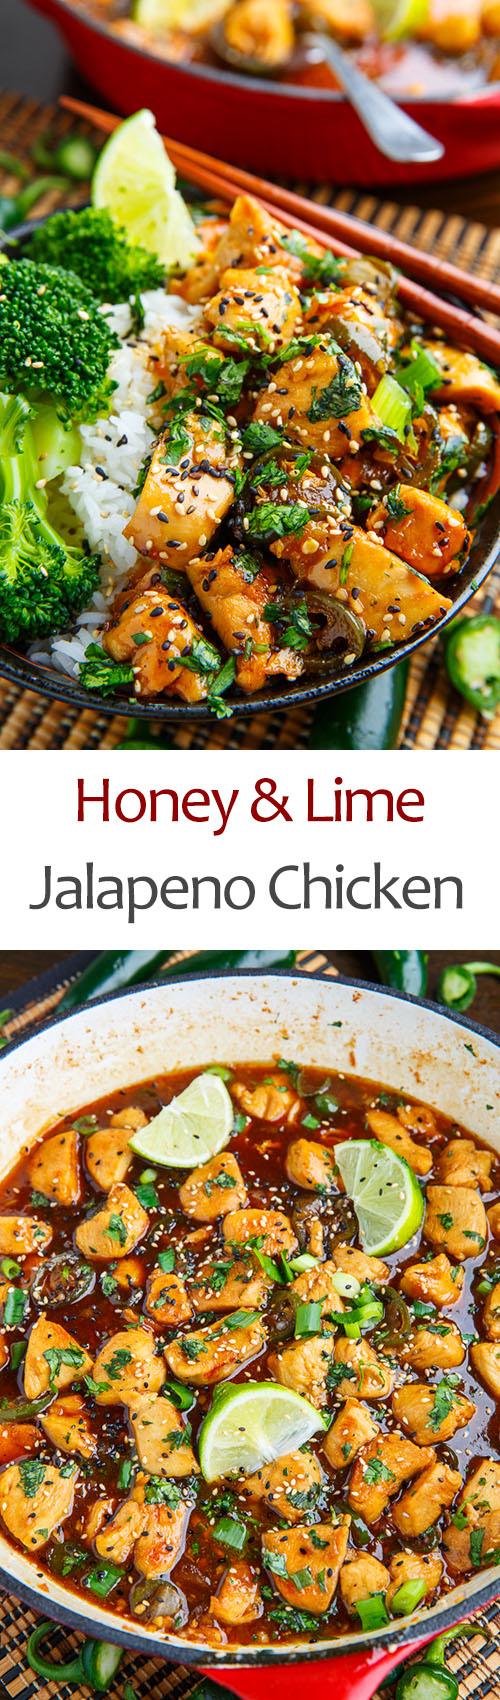 Honey and Lime Jalapeno Chicken